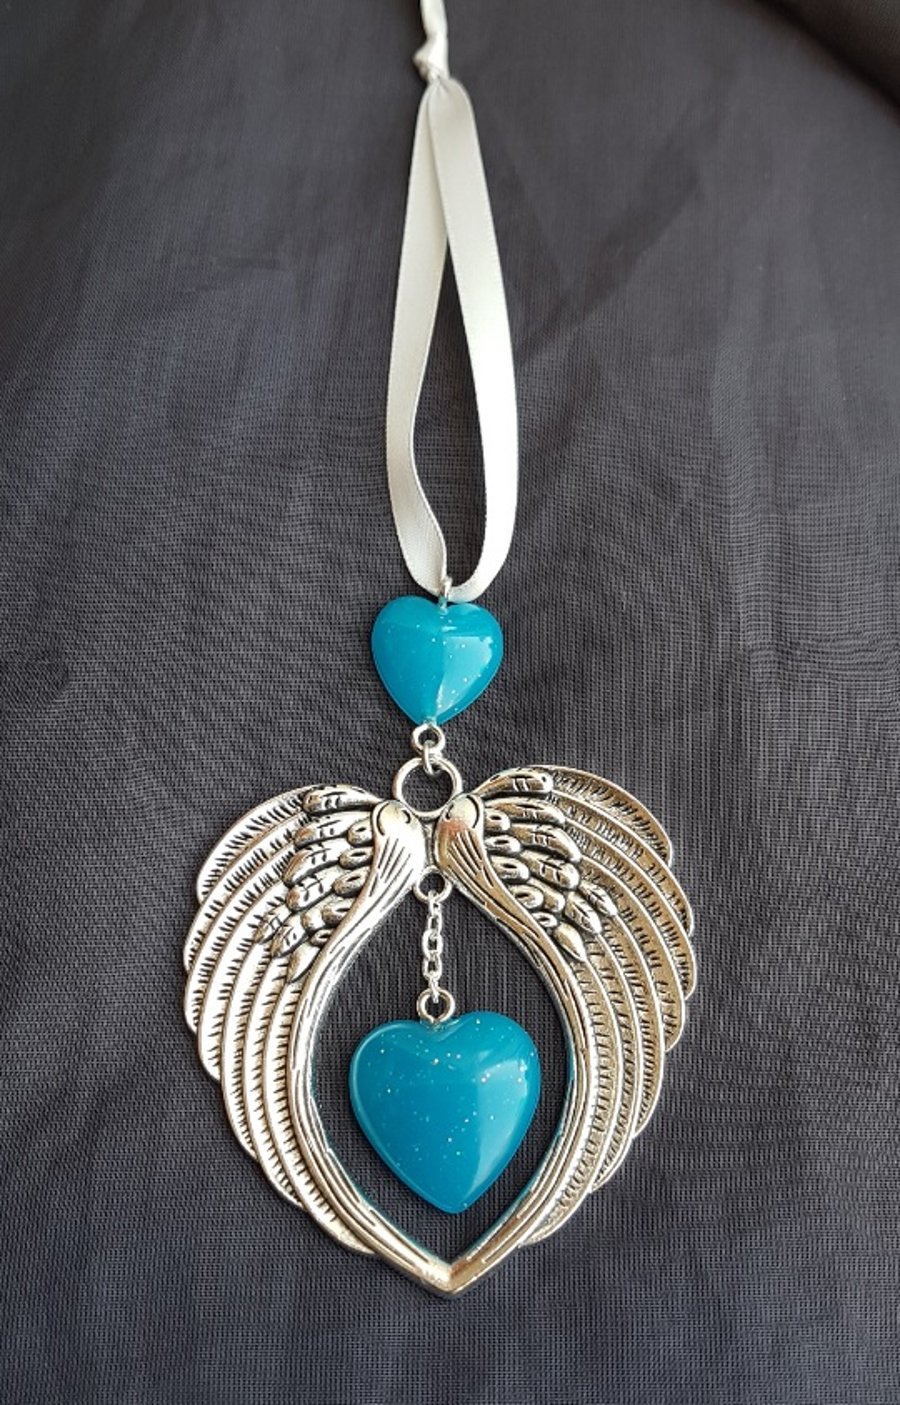 Gorgeous Angel Wings Ornament with Glittery Blue Hearts.